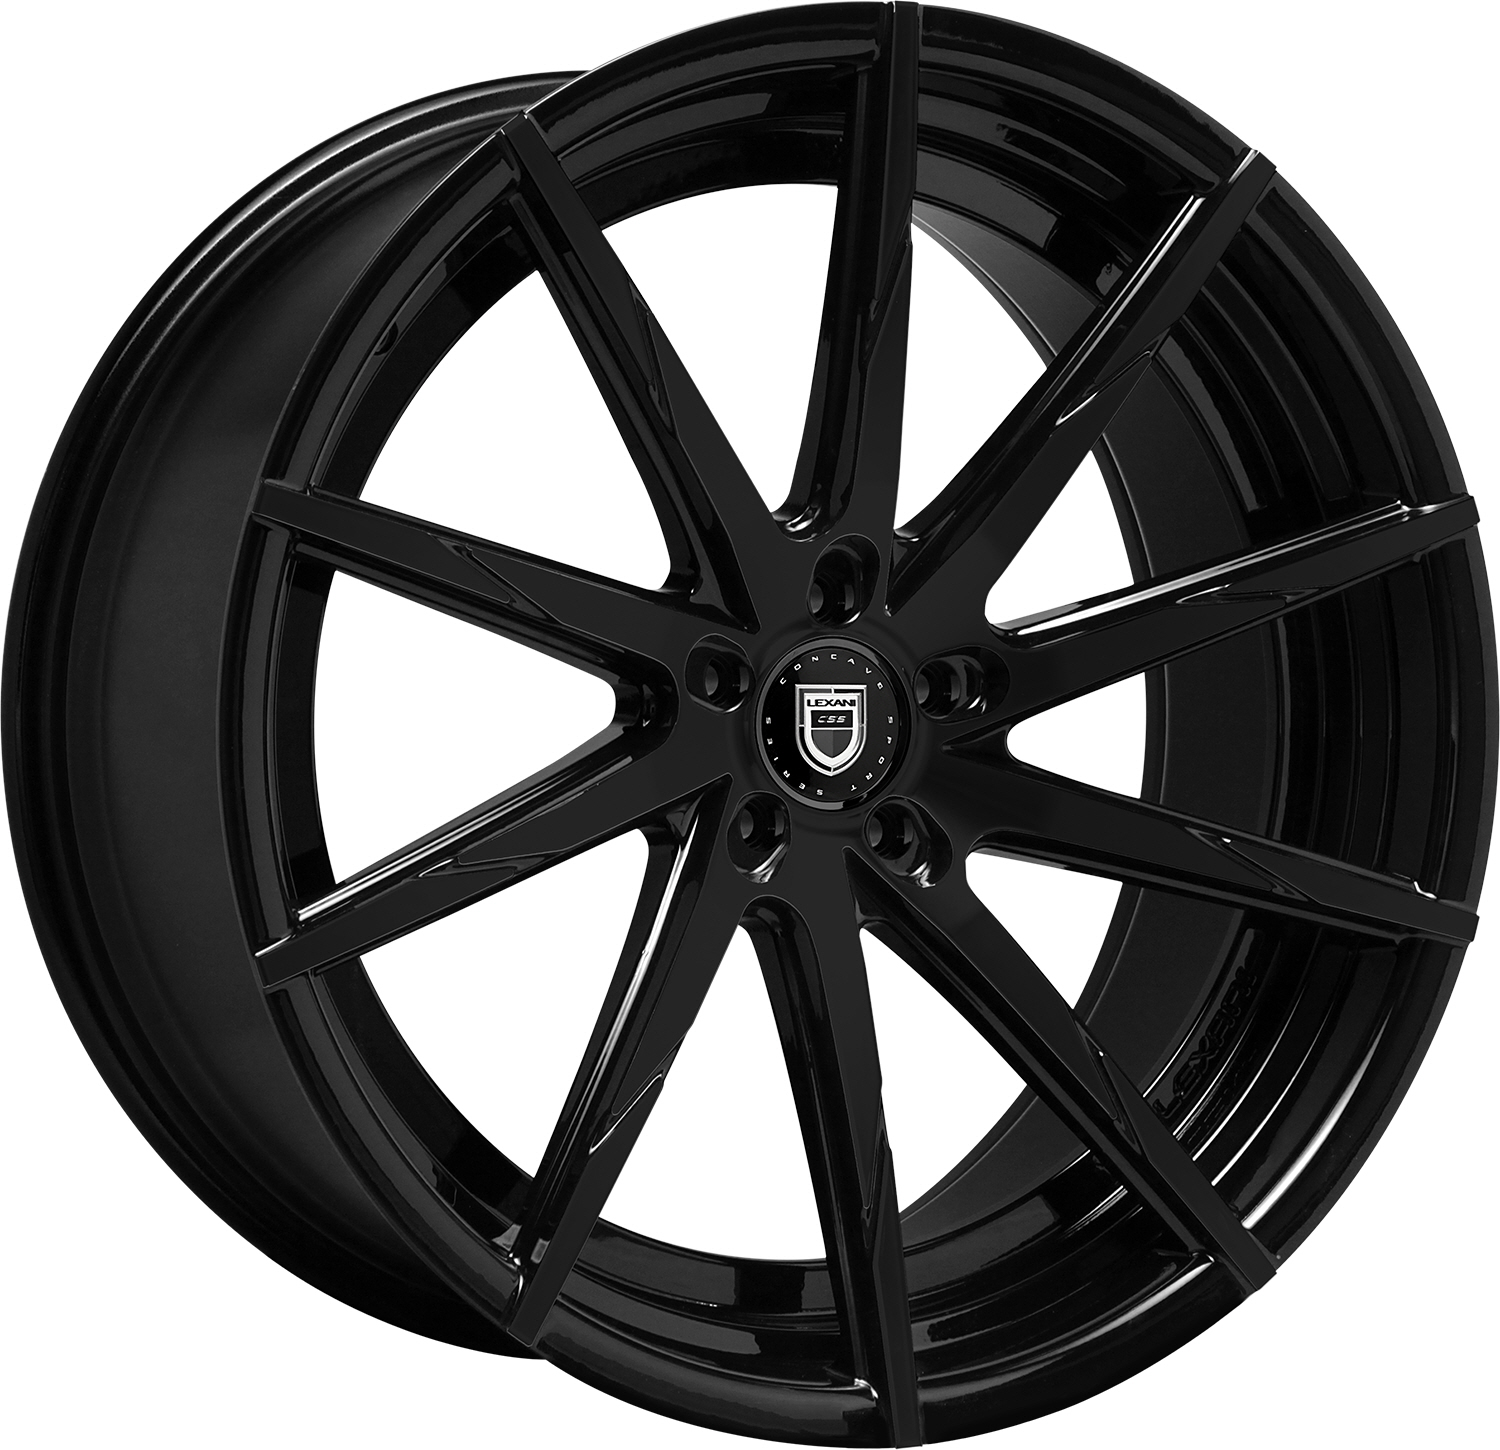 CSS-15  WHEELS AND RIMS PACKAGES